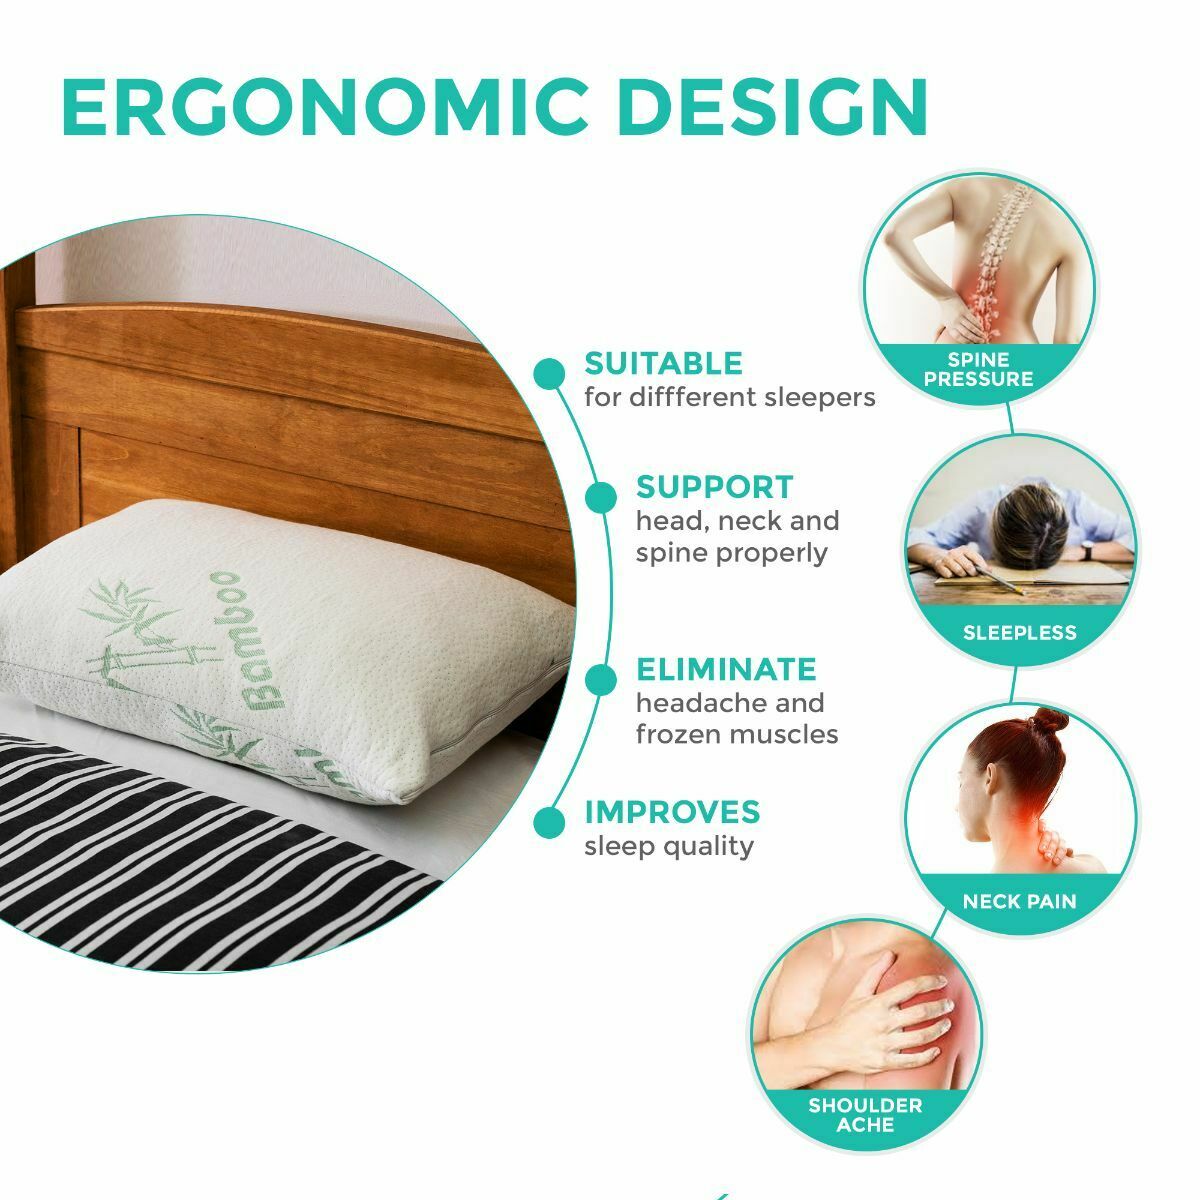 Bamboo Memory Foam Pillows Firm Neck Support Anti Allergy Pillow - TheComfortshop.co.ukPillows0721718957591thecomfortshopTheComfortshop.co.ukBamboo Pillow NightBamboo Memory Foam Pillows Firm Neck Support Anti Allergy Pillow - TheComfortshop.co.uk